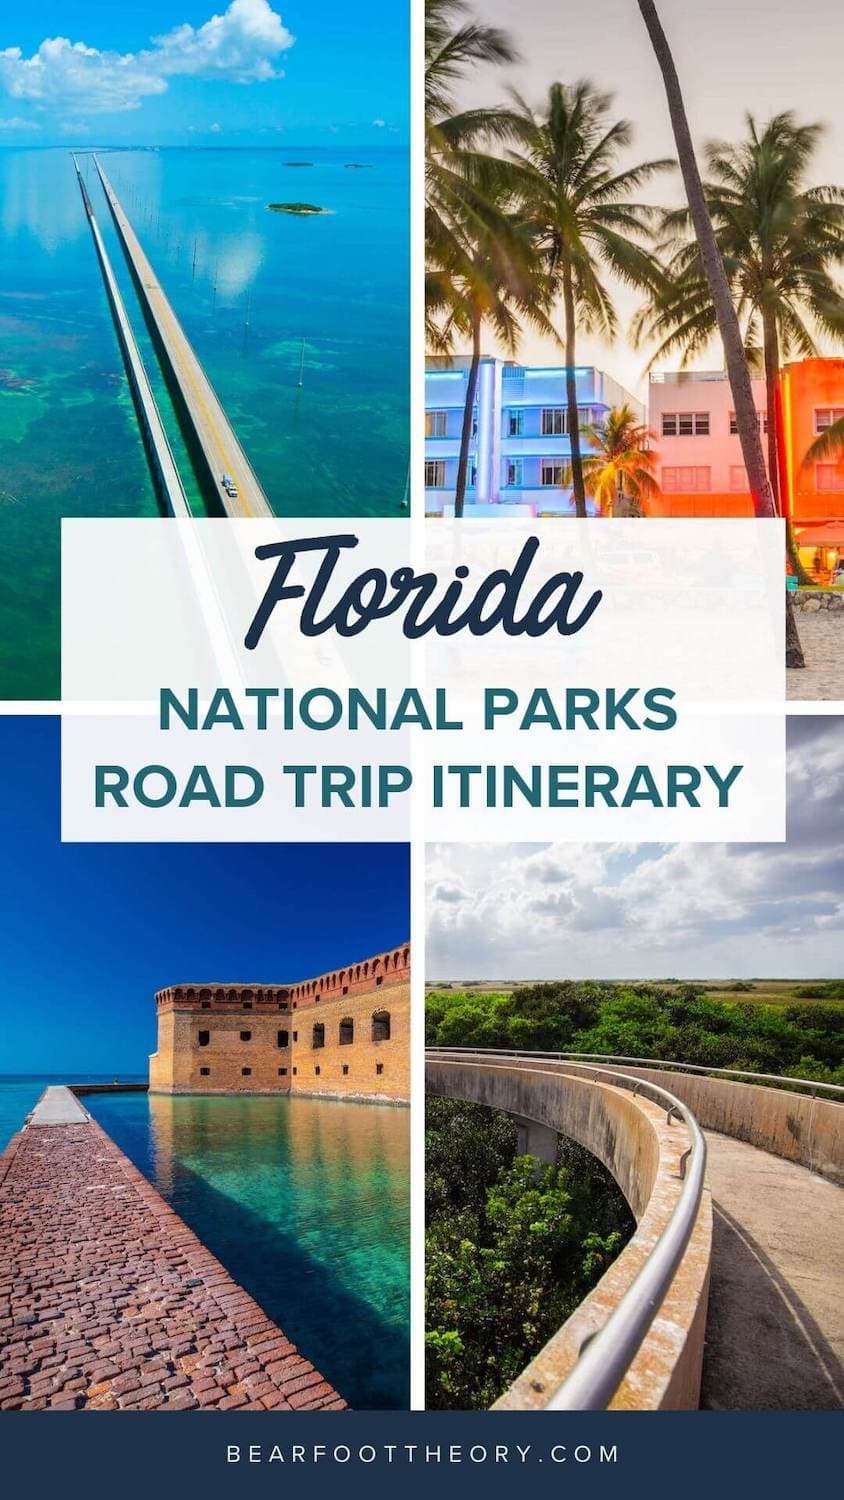 Plan your Florida National Parks itinerary with this 7-day road trip guide that visits Key Biscayne, Everglades & Dry Tortugas National Parks